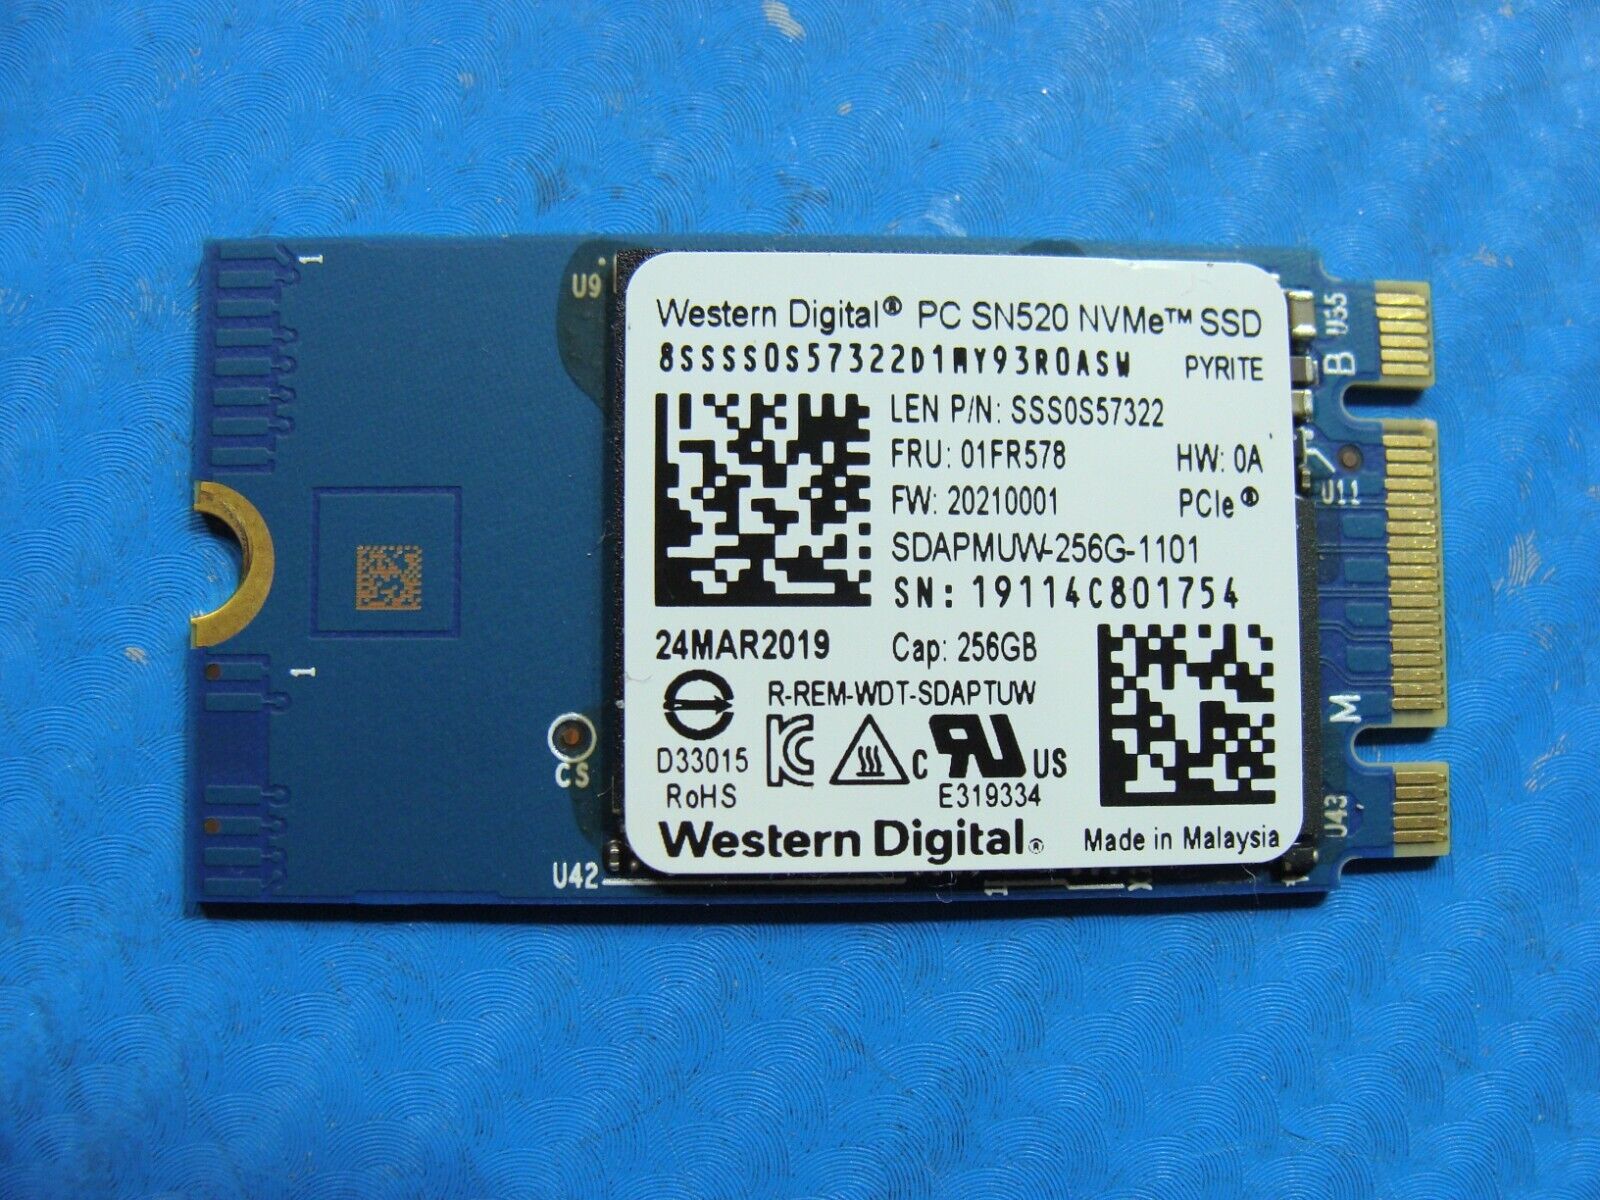 Lenovo 14s-IWL 20RM WD 256GB NVMe M.2 SSD Solid State Drive SDAPMUW-256G-1101